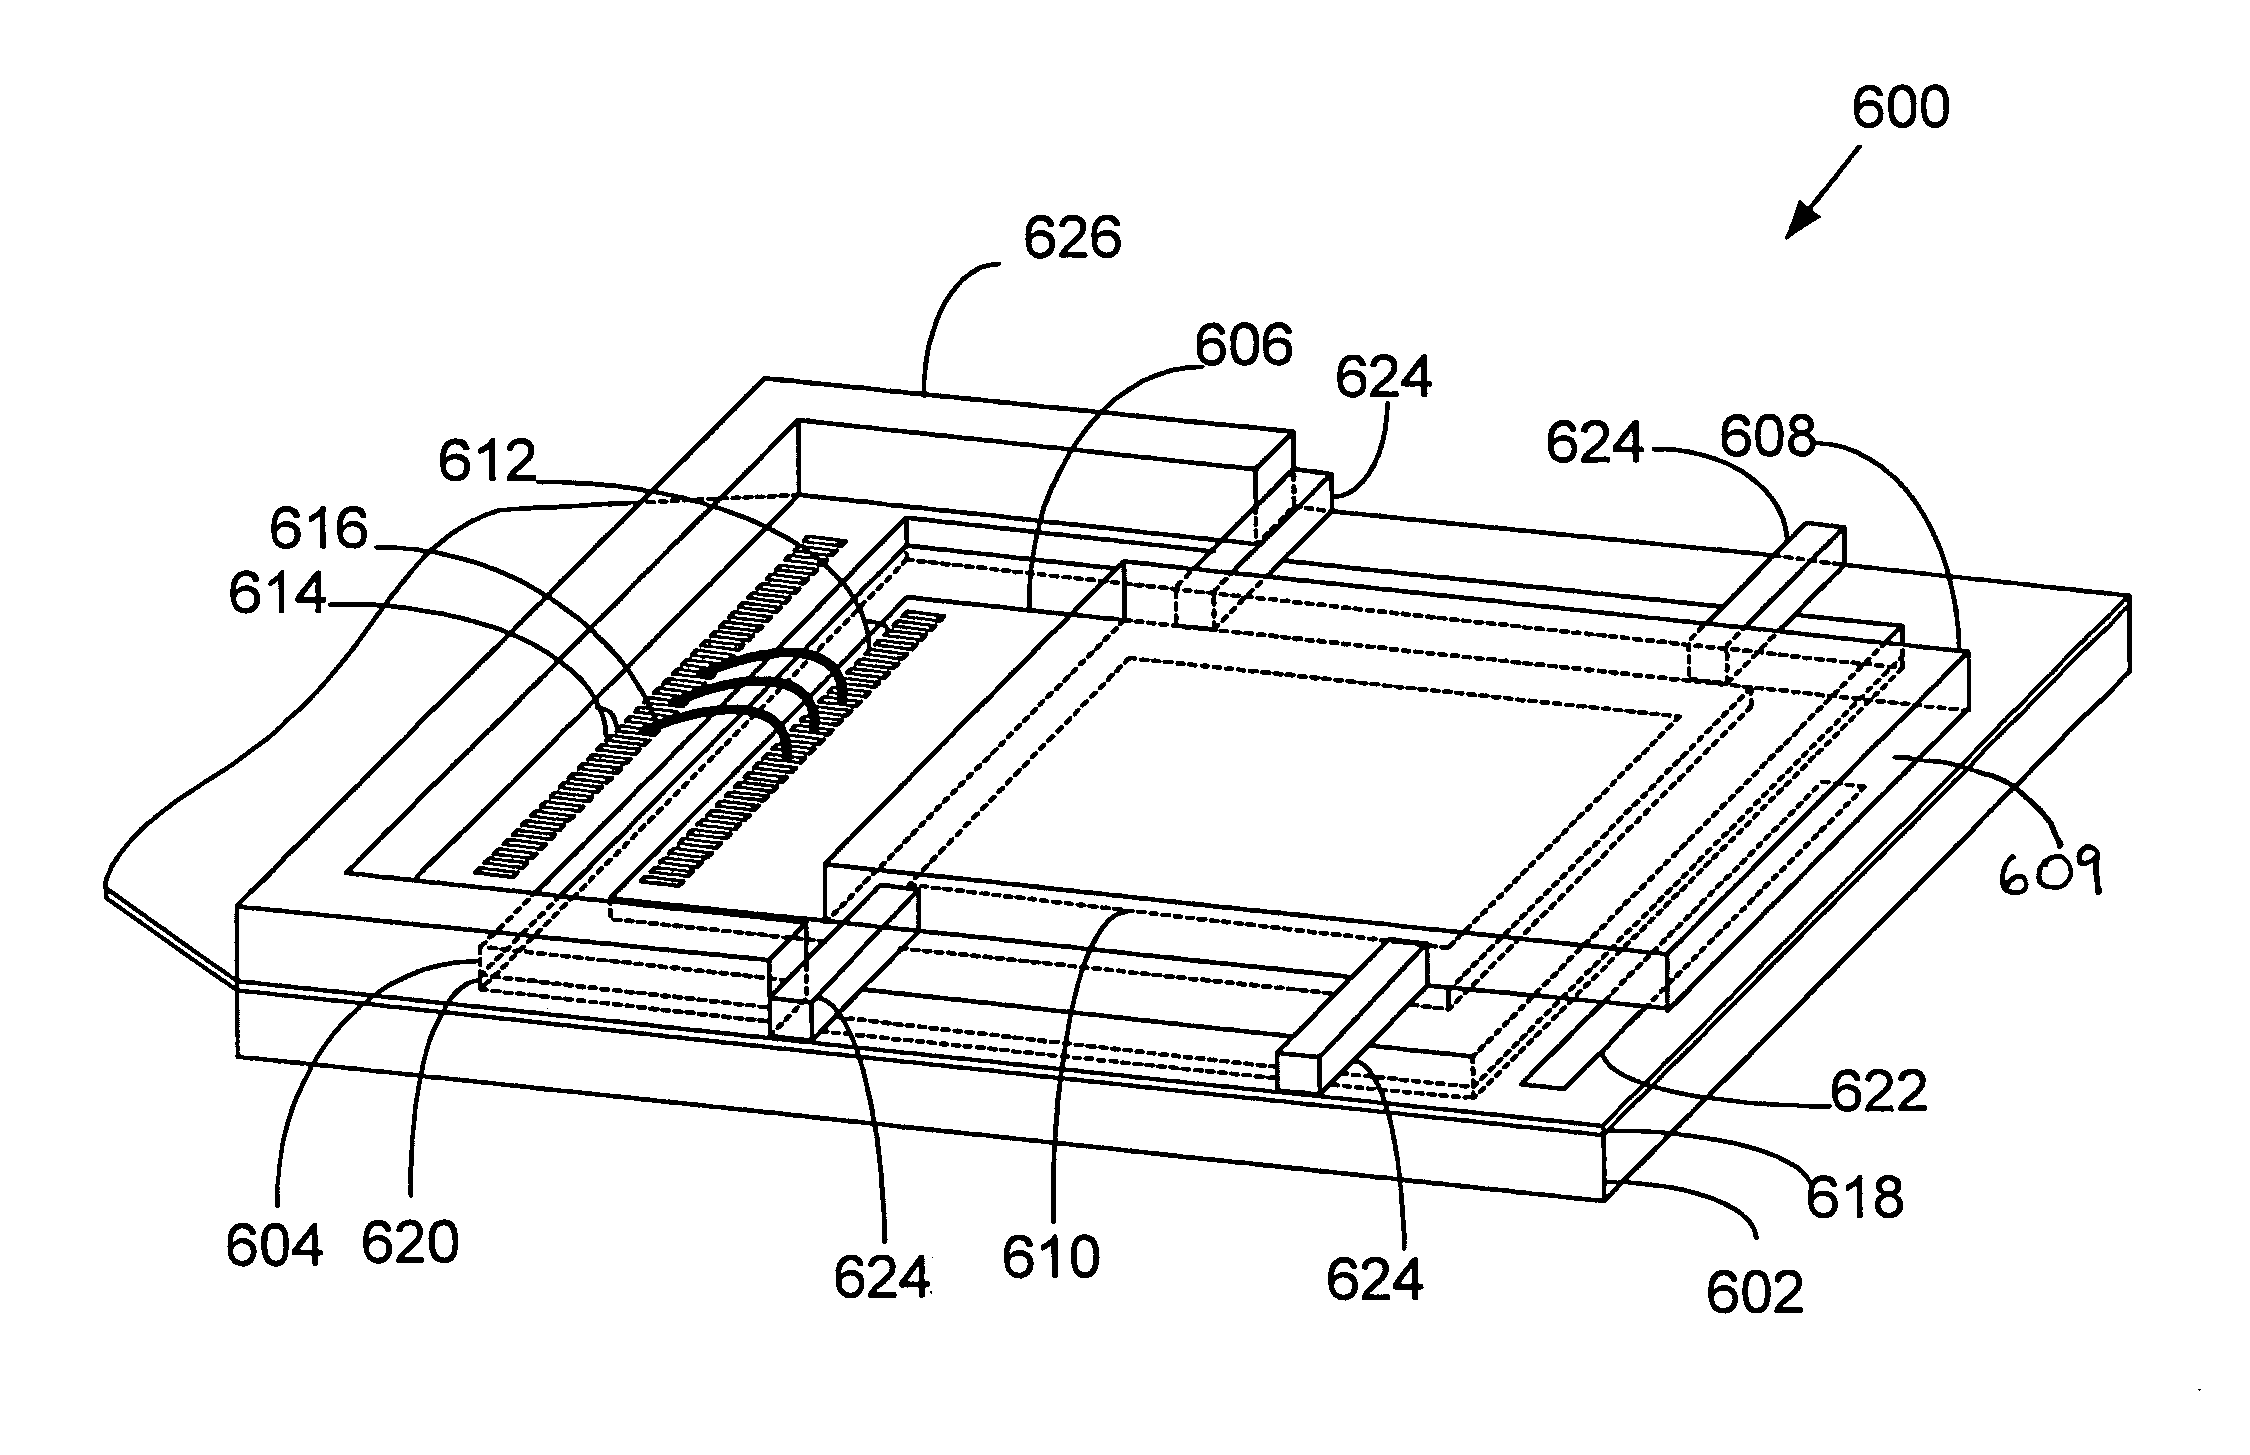 Liquid crystal display assembly for reducing optical defects